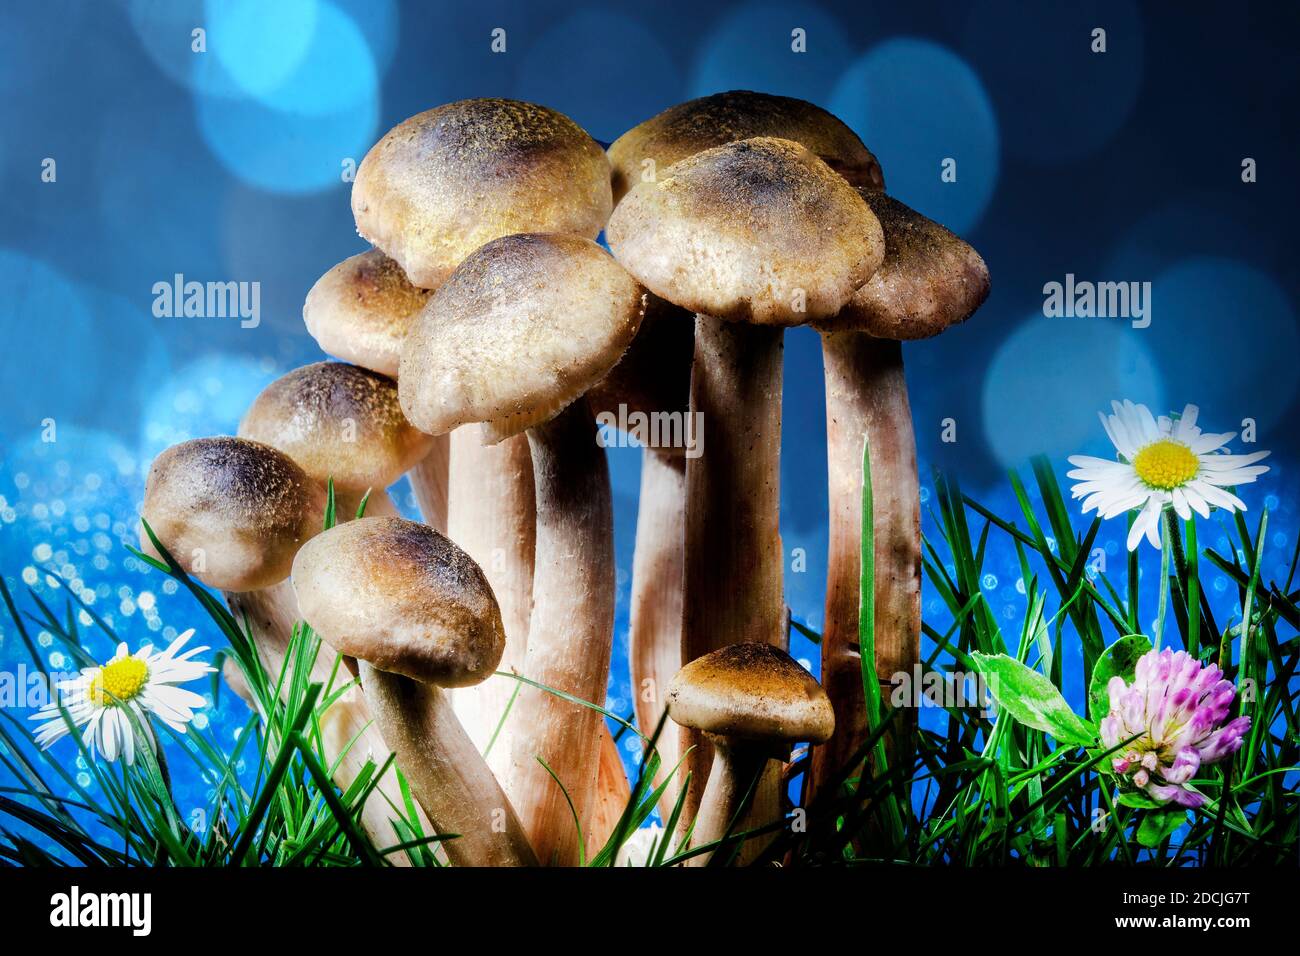 Fantasy Photo of Sheathed Wood Tuft Mushrooms Detail on Meadow With Grass And Flowers on Gradient Bokeh Background Stock Photo